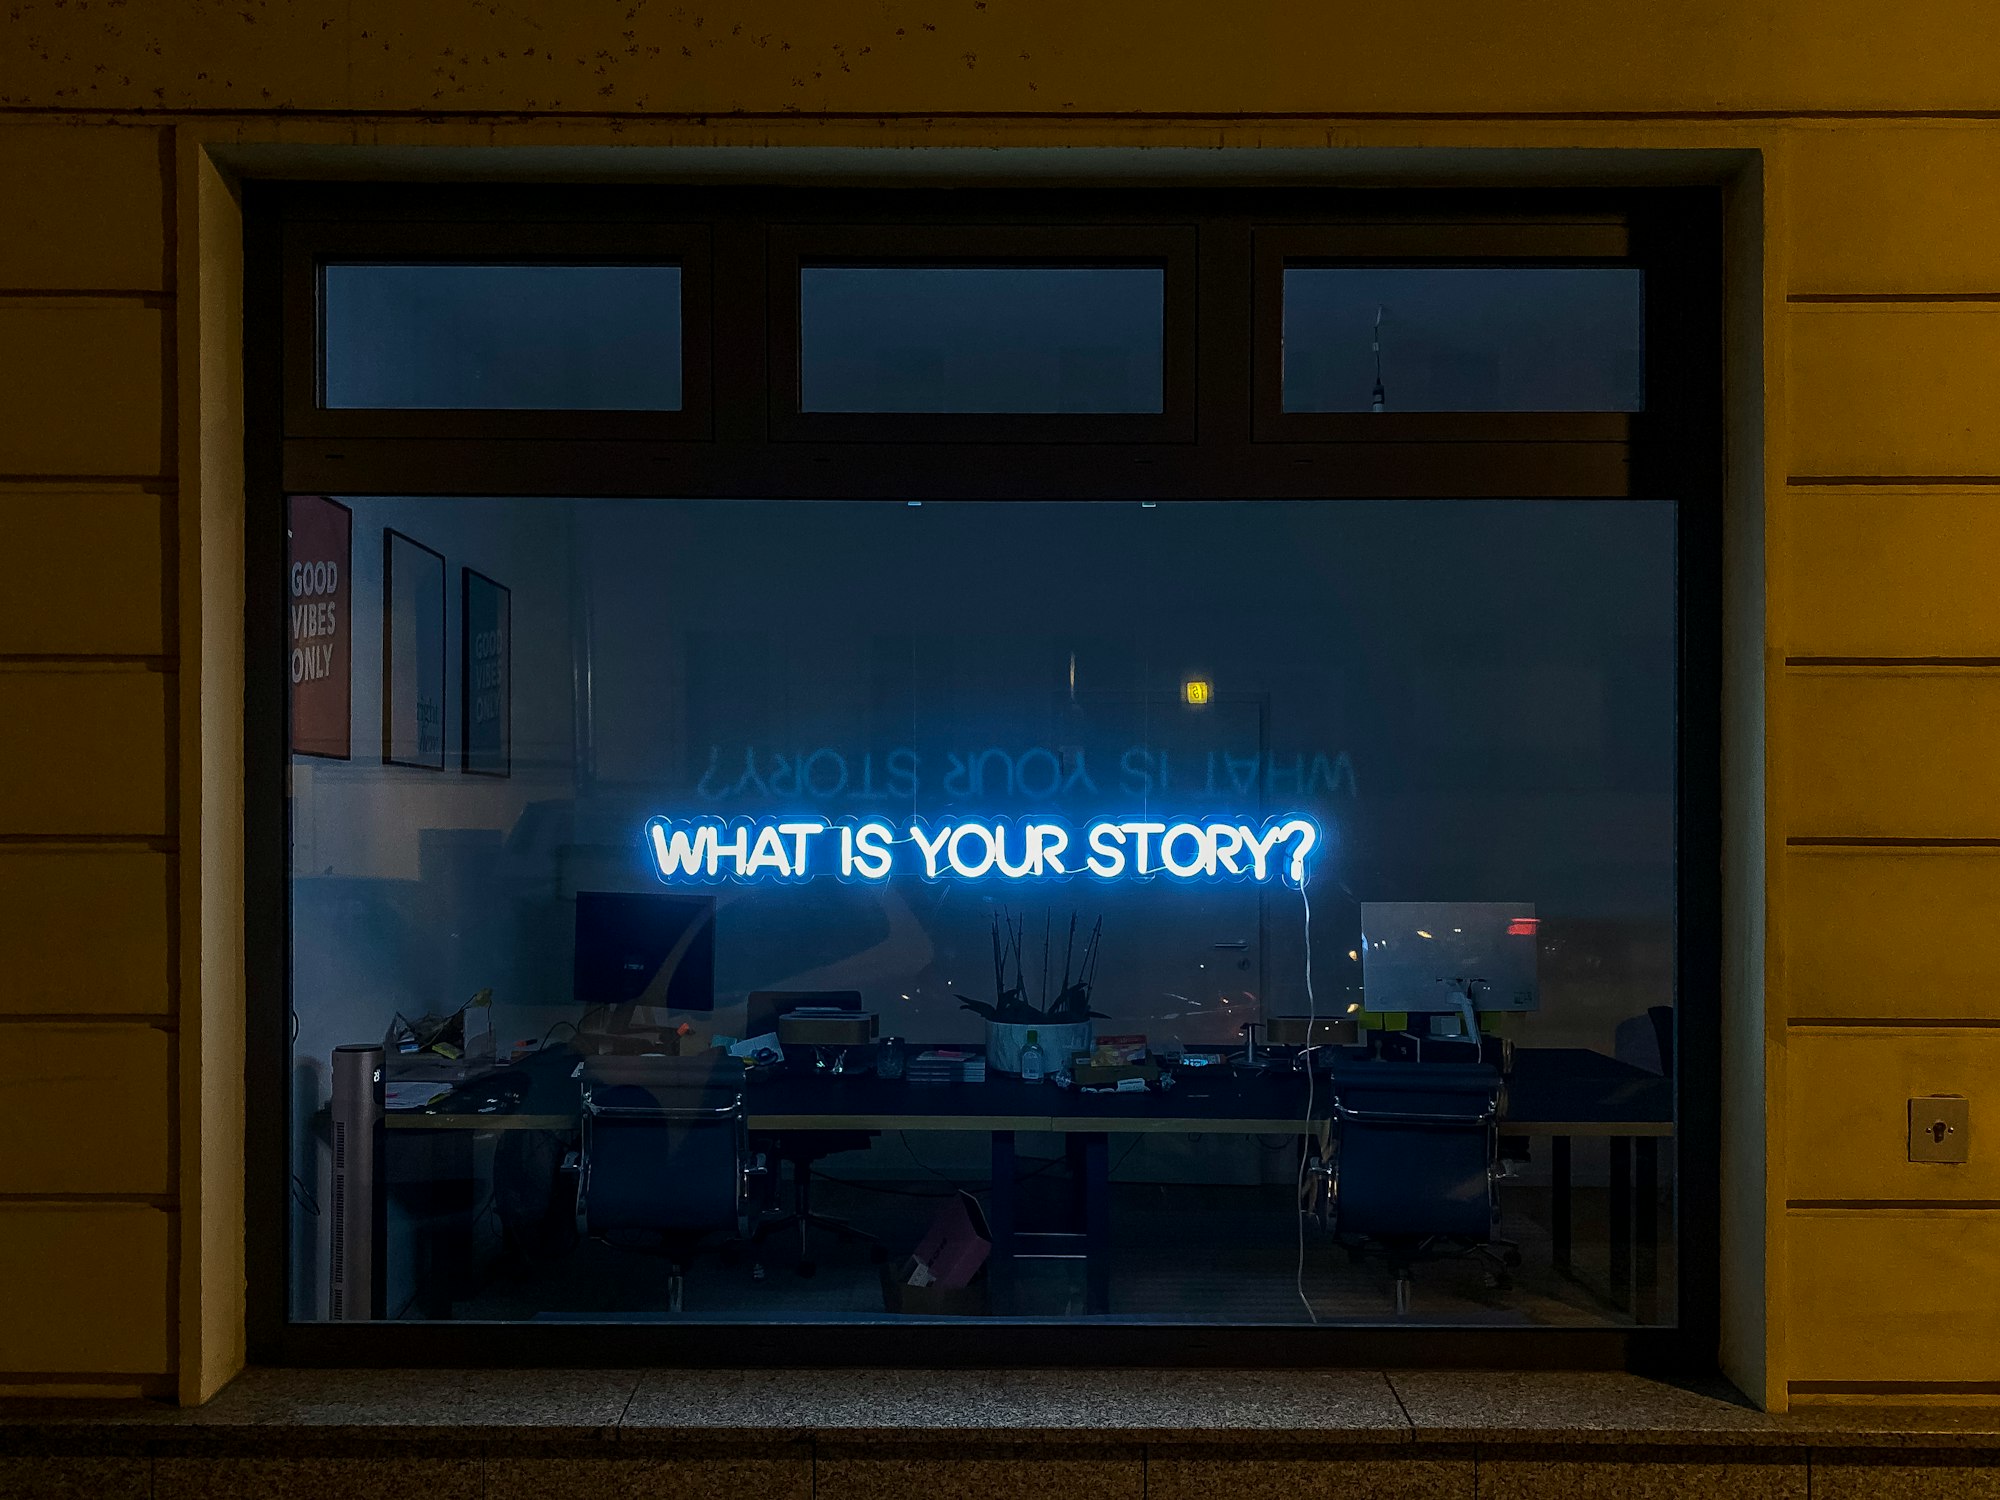 photograph of a shop window in a city that asks "what is your story?"